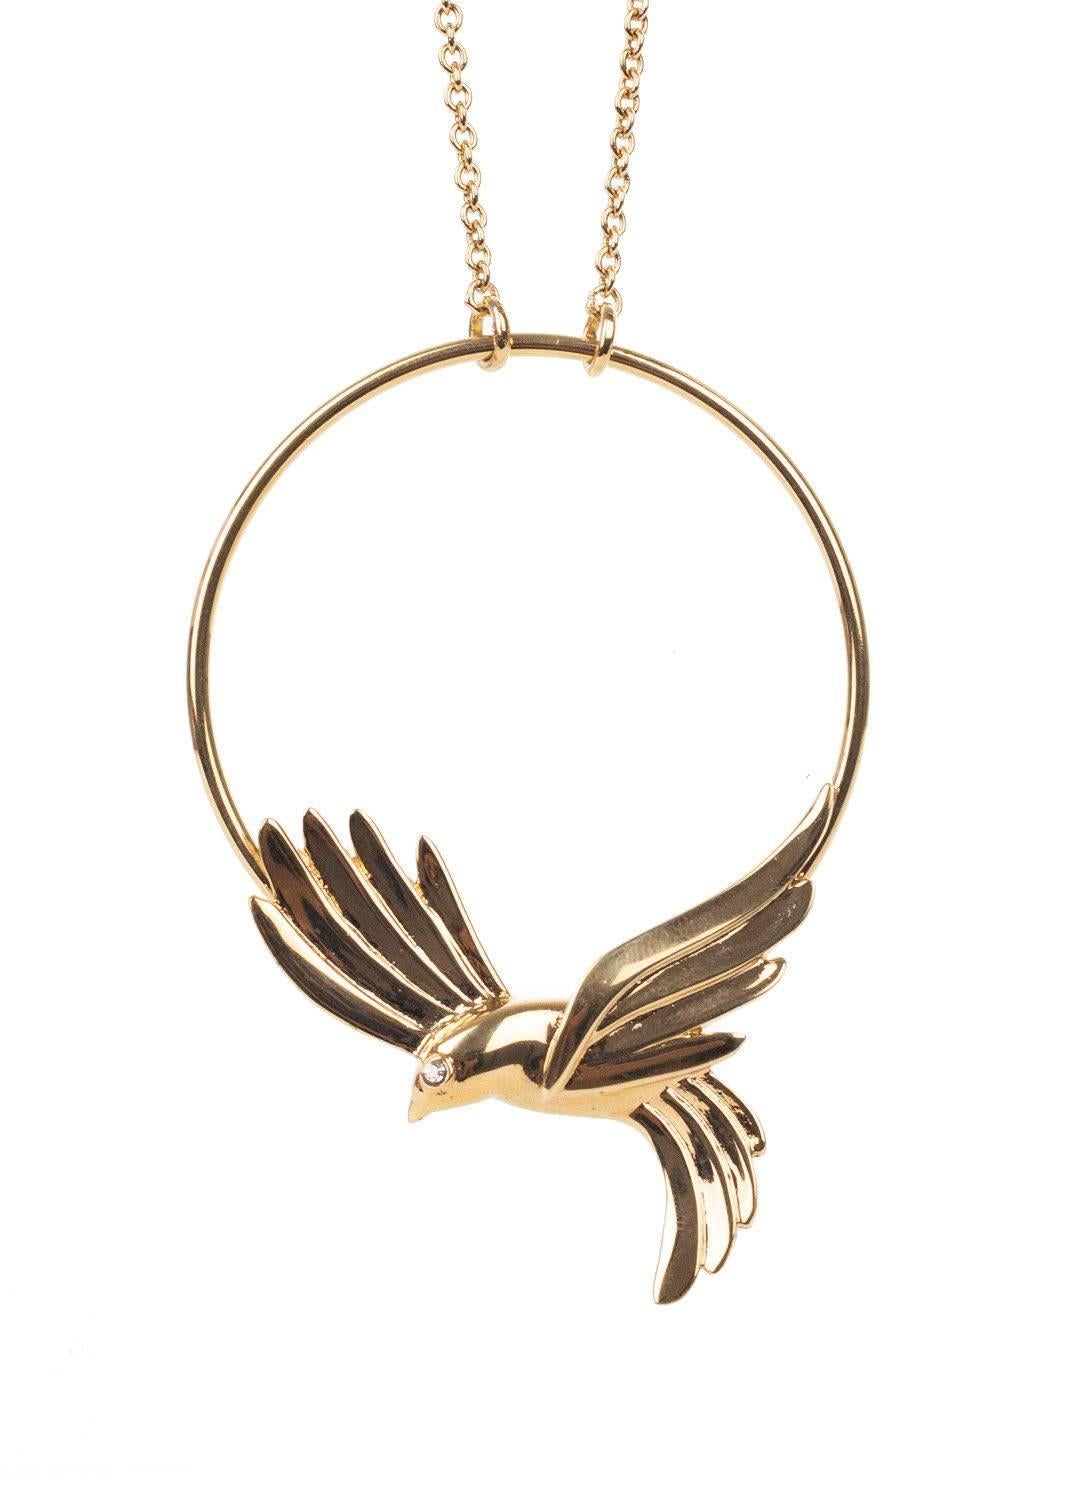 Roberto Cavalli gold plated necklace. This necklace featurs a long gold chain with a bird pendant design encrusted with a single swarovski crystal. Perfect minimalistic piece for an everyday wear. This necklace is great on all outfits.

